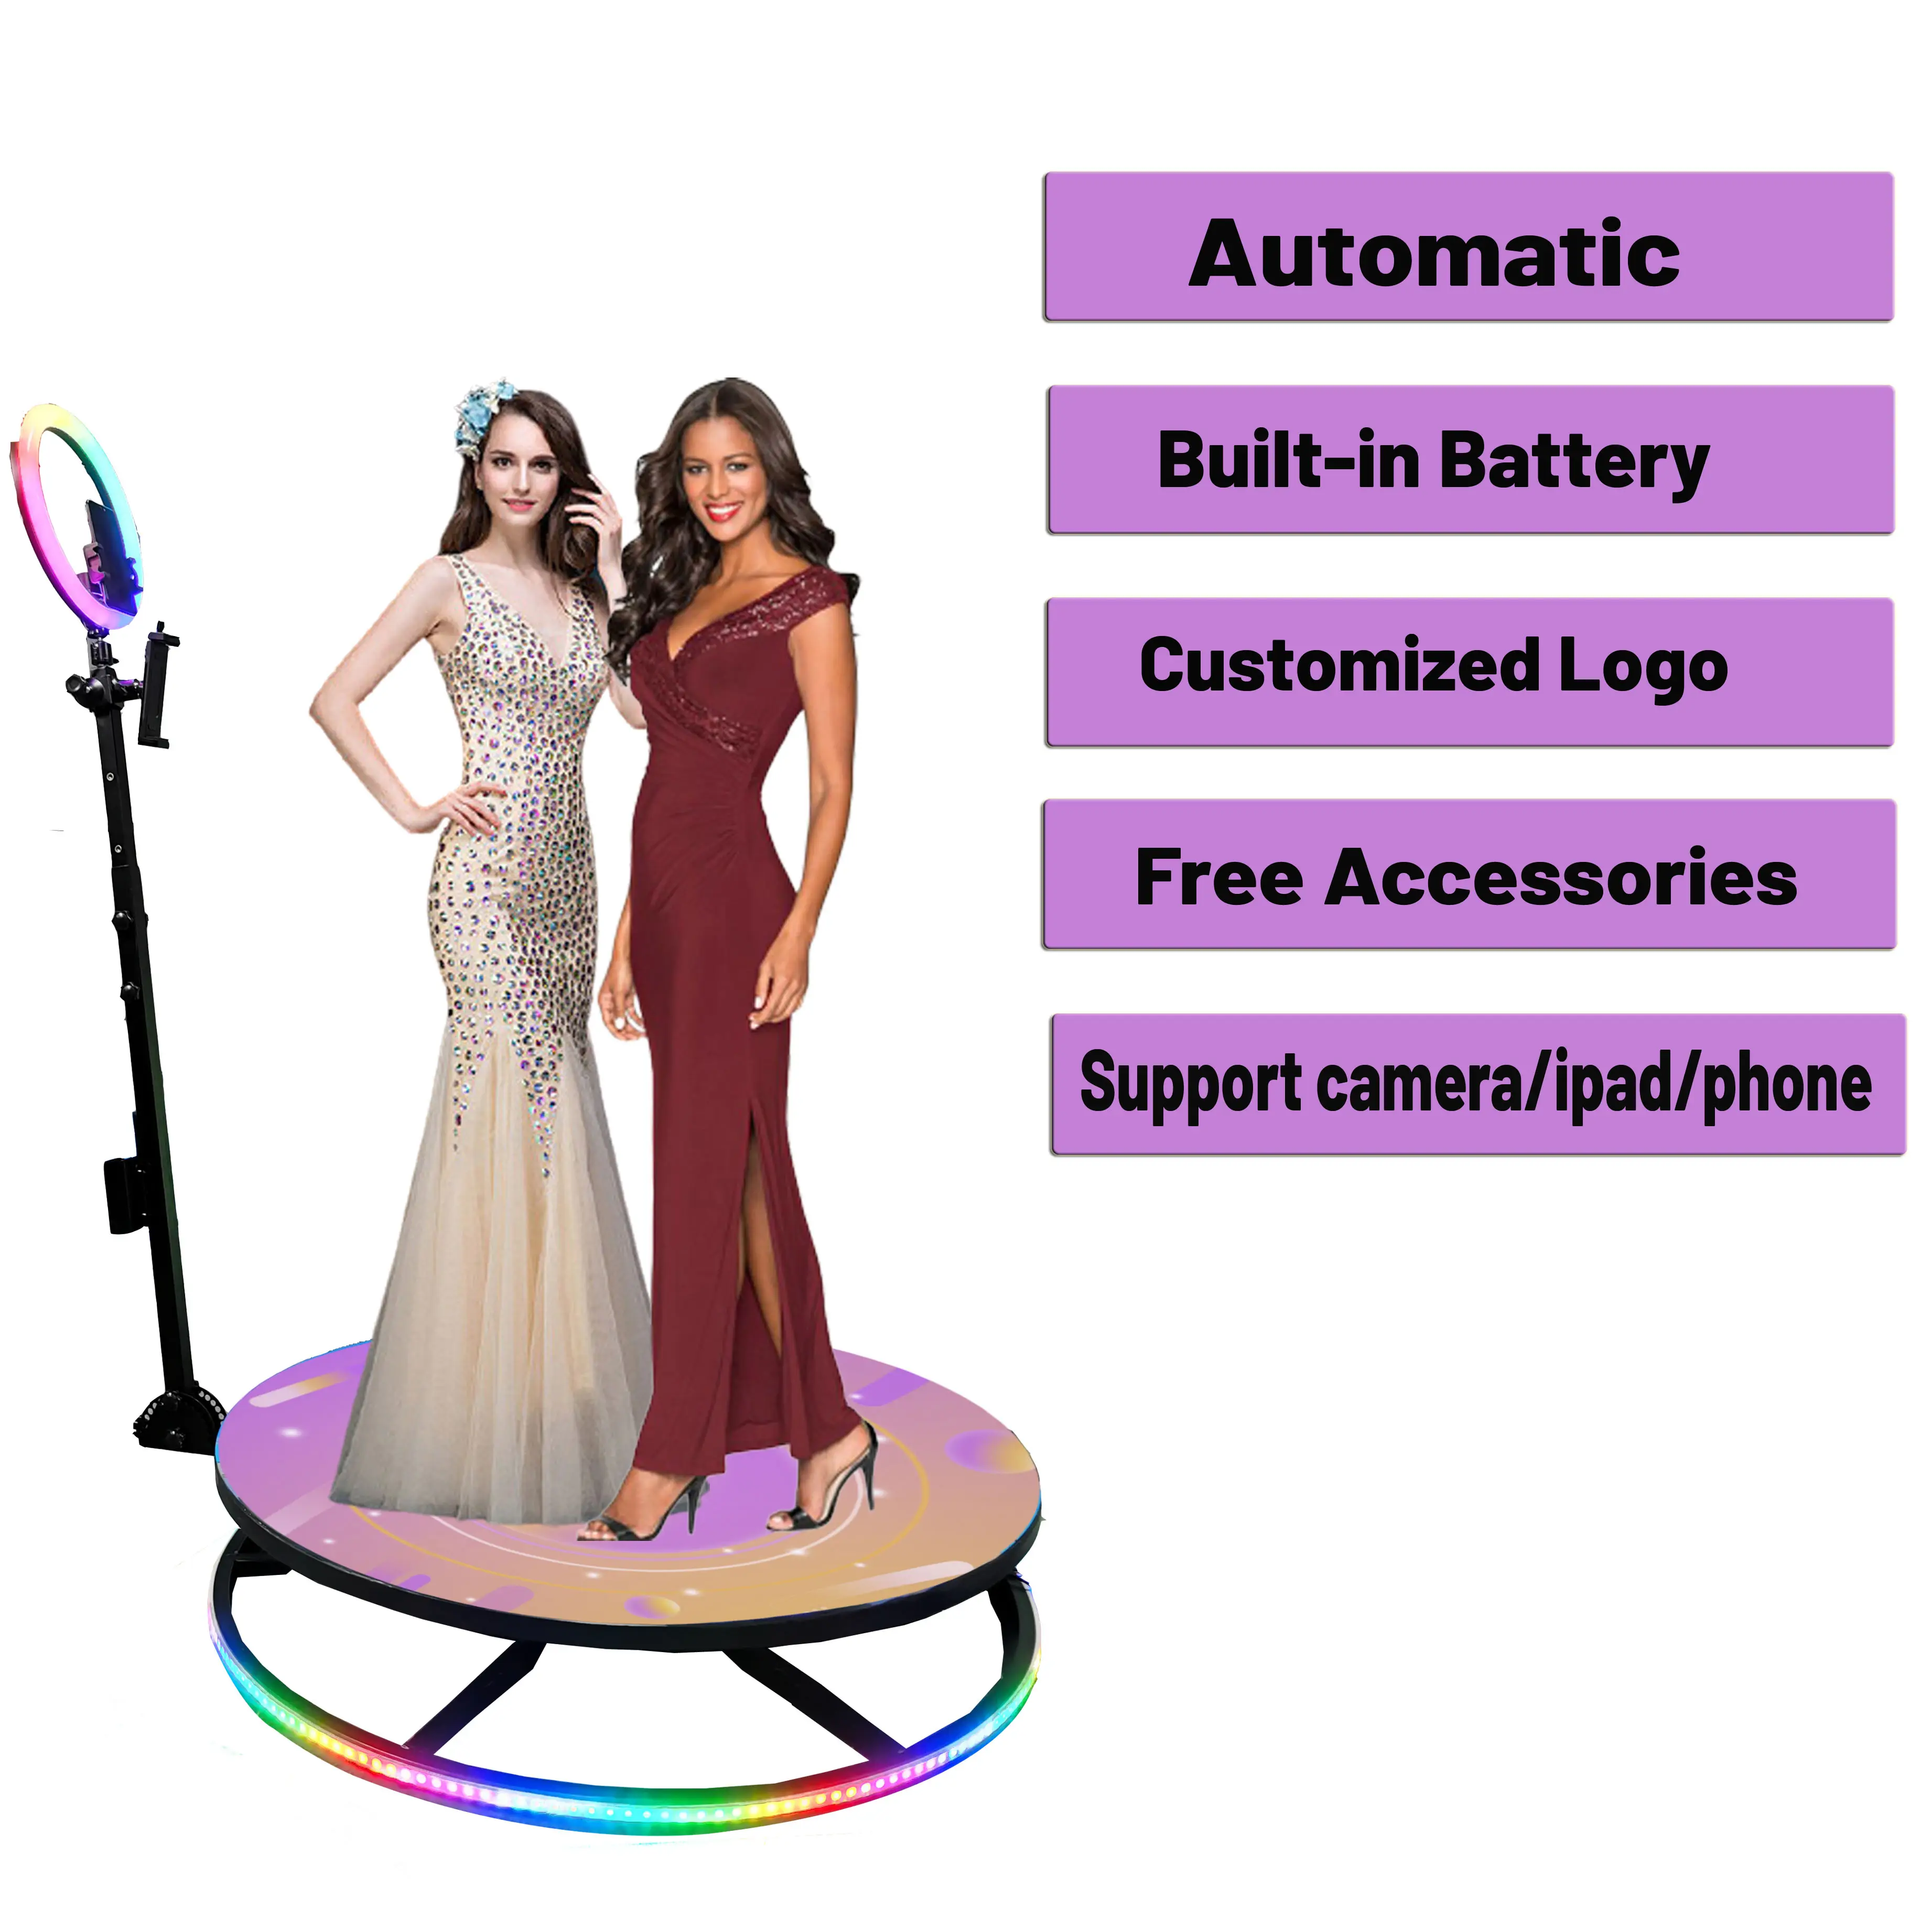 68 115cm 3D Rotating Video Ring Light Spin Party Camera Photo Booth Spinner Wedding Automatic Degree 360 Photo Booth Photobooth